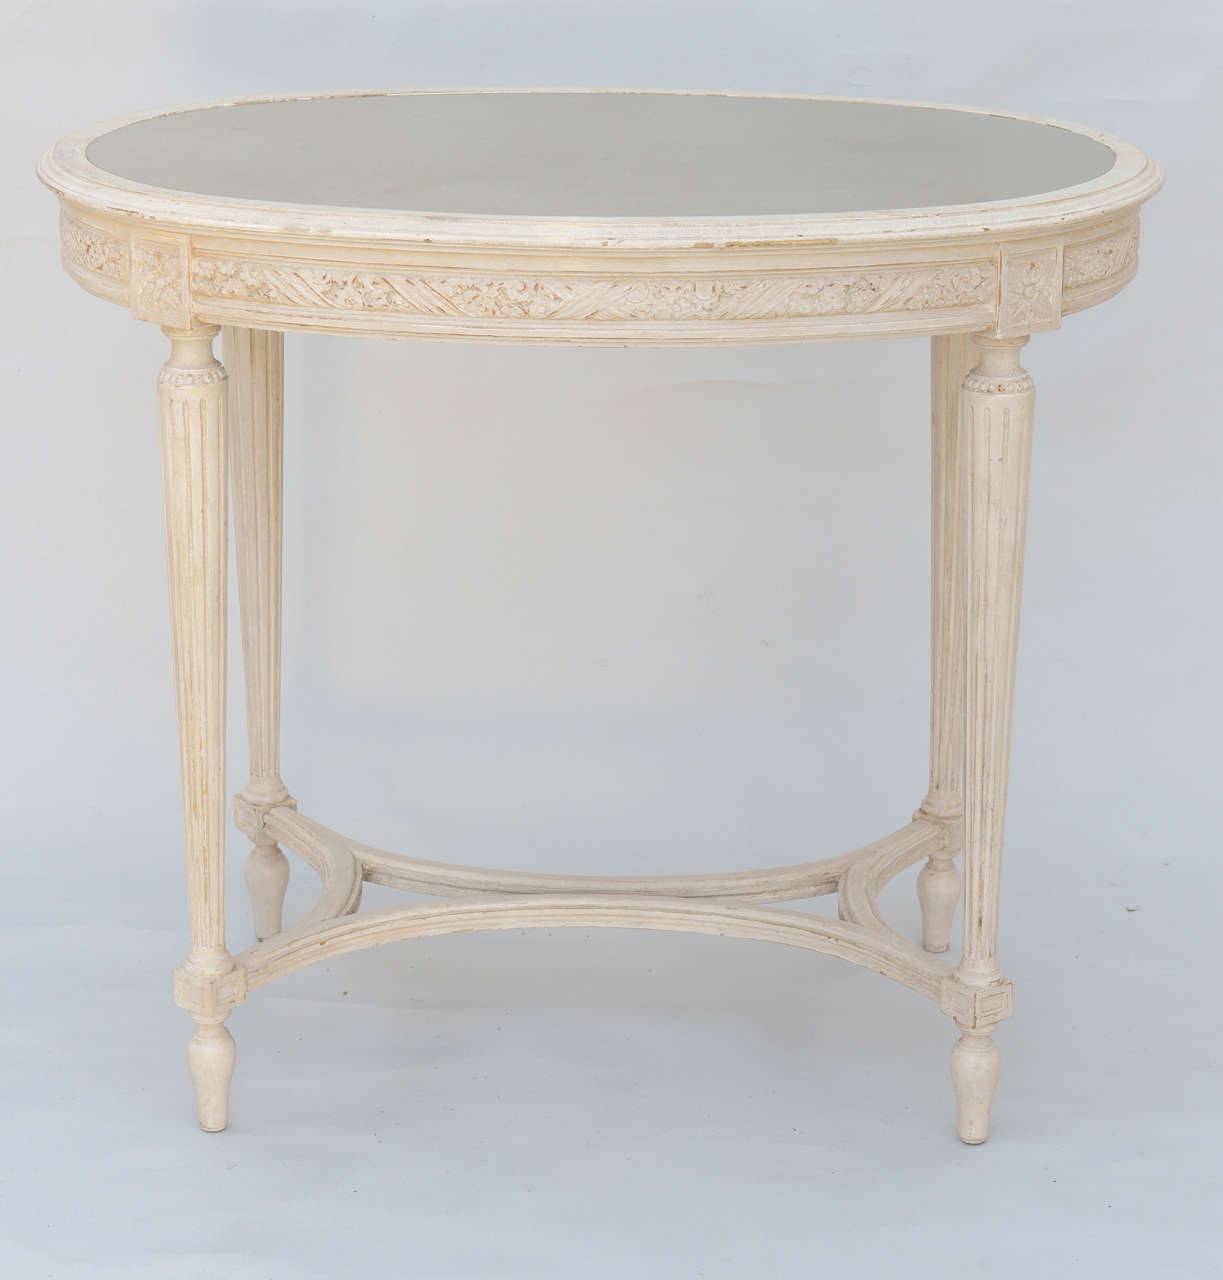 Oval accent table, Louis XVI form, having distressed painted finish, spotted mirror top inset in frame, intricately carved apron, round fluted tapering legs connected by curved stretcher.